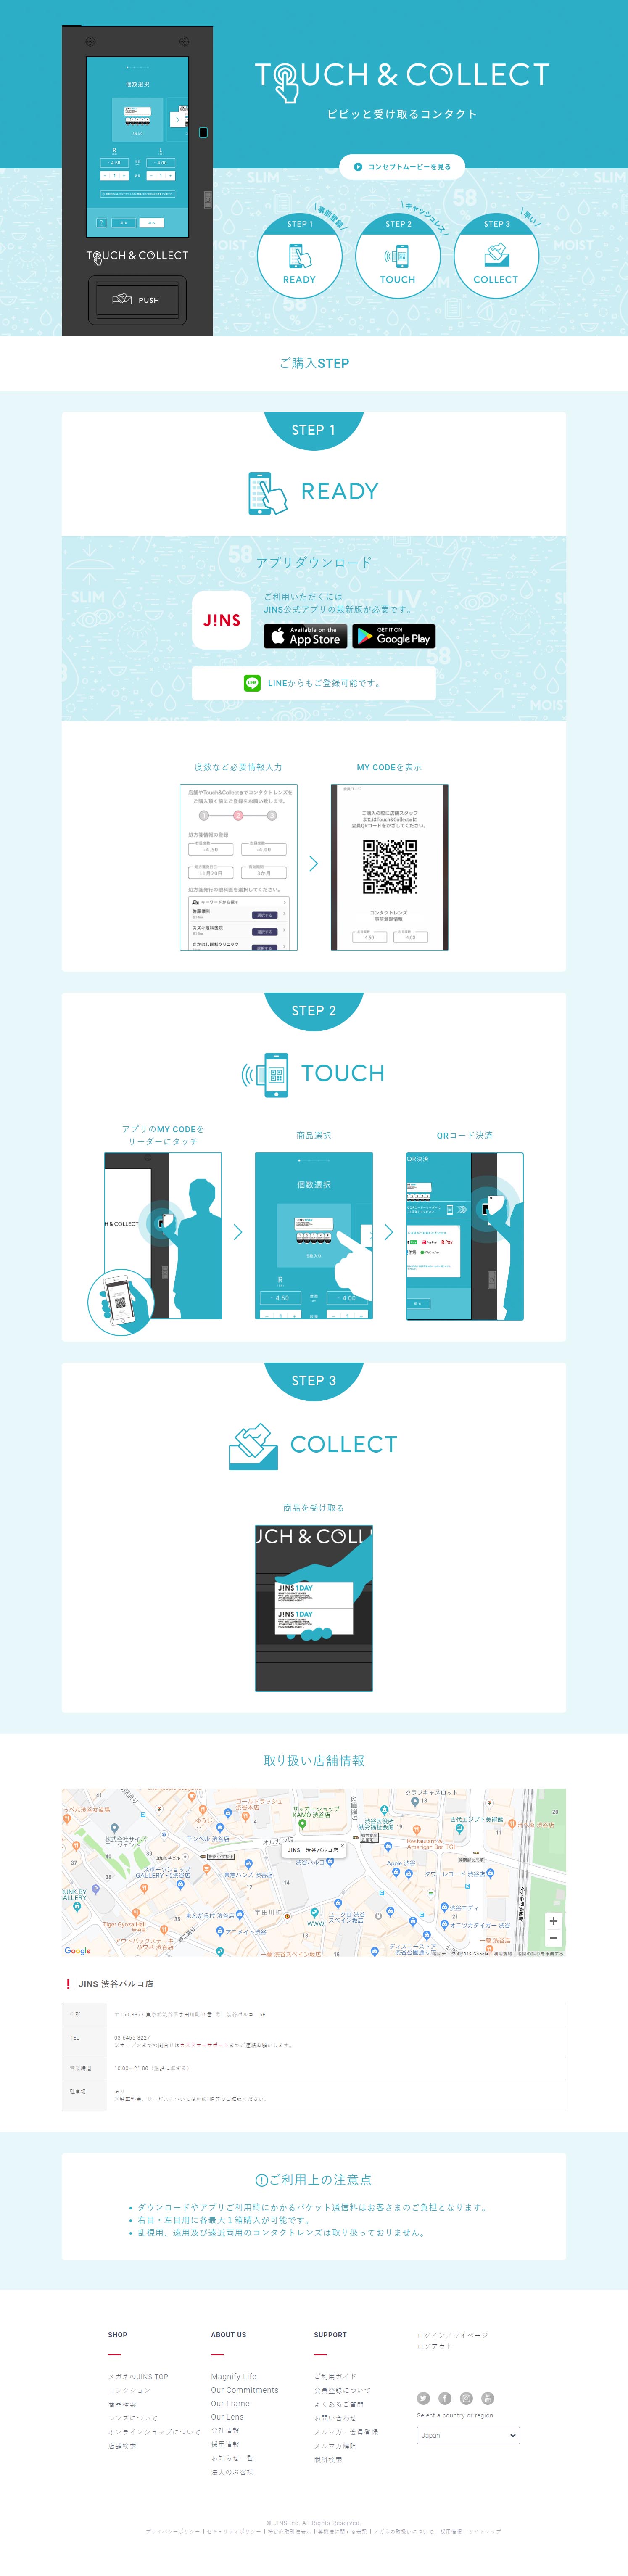 TOUCH＆COLLECT_pc_1